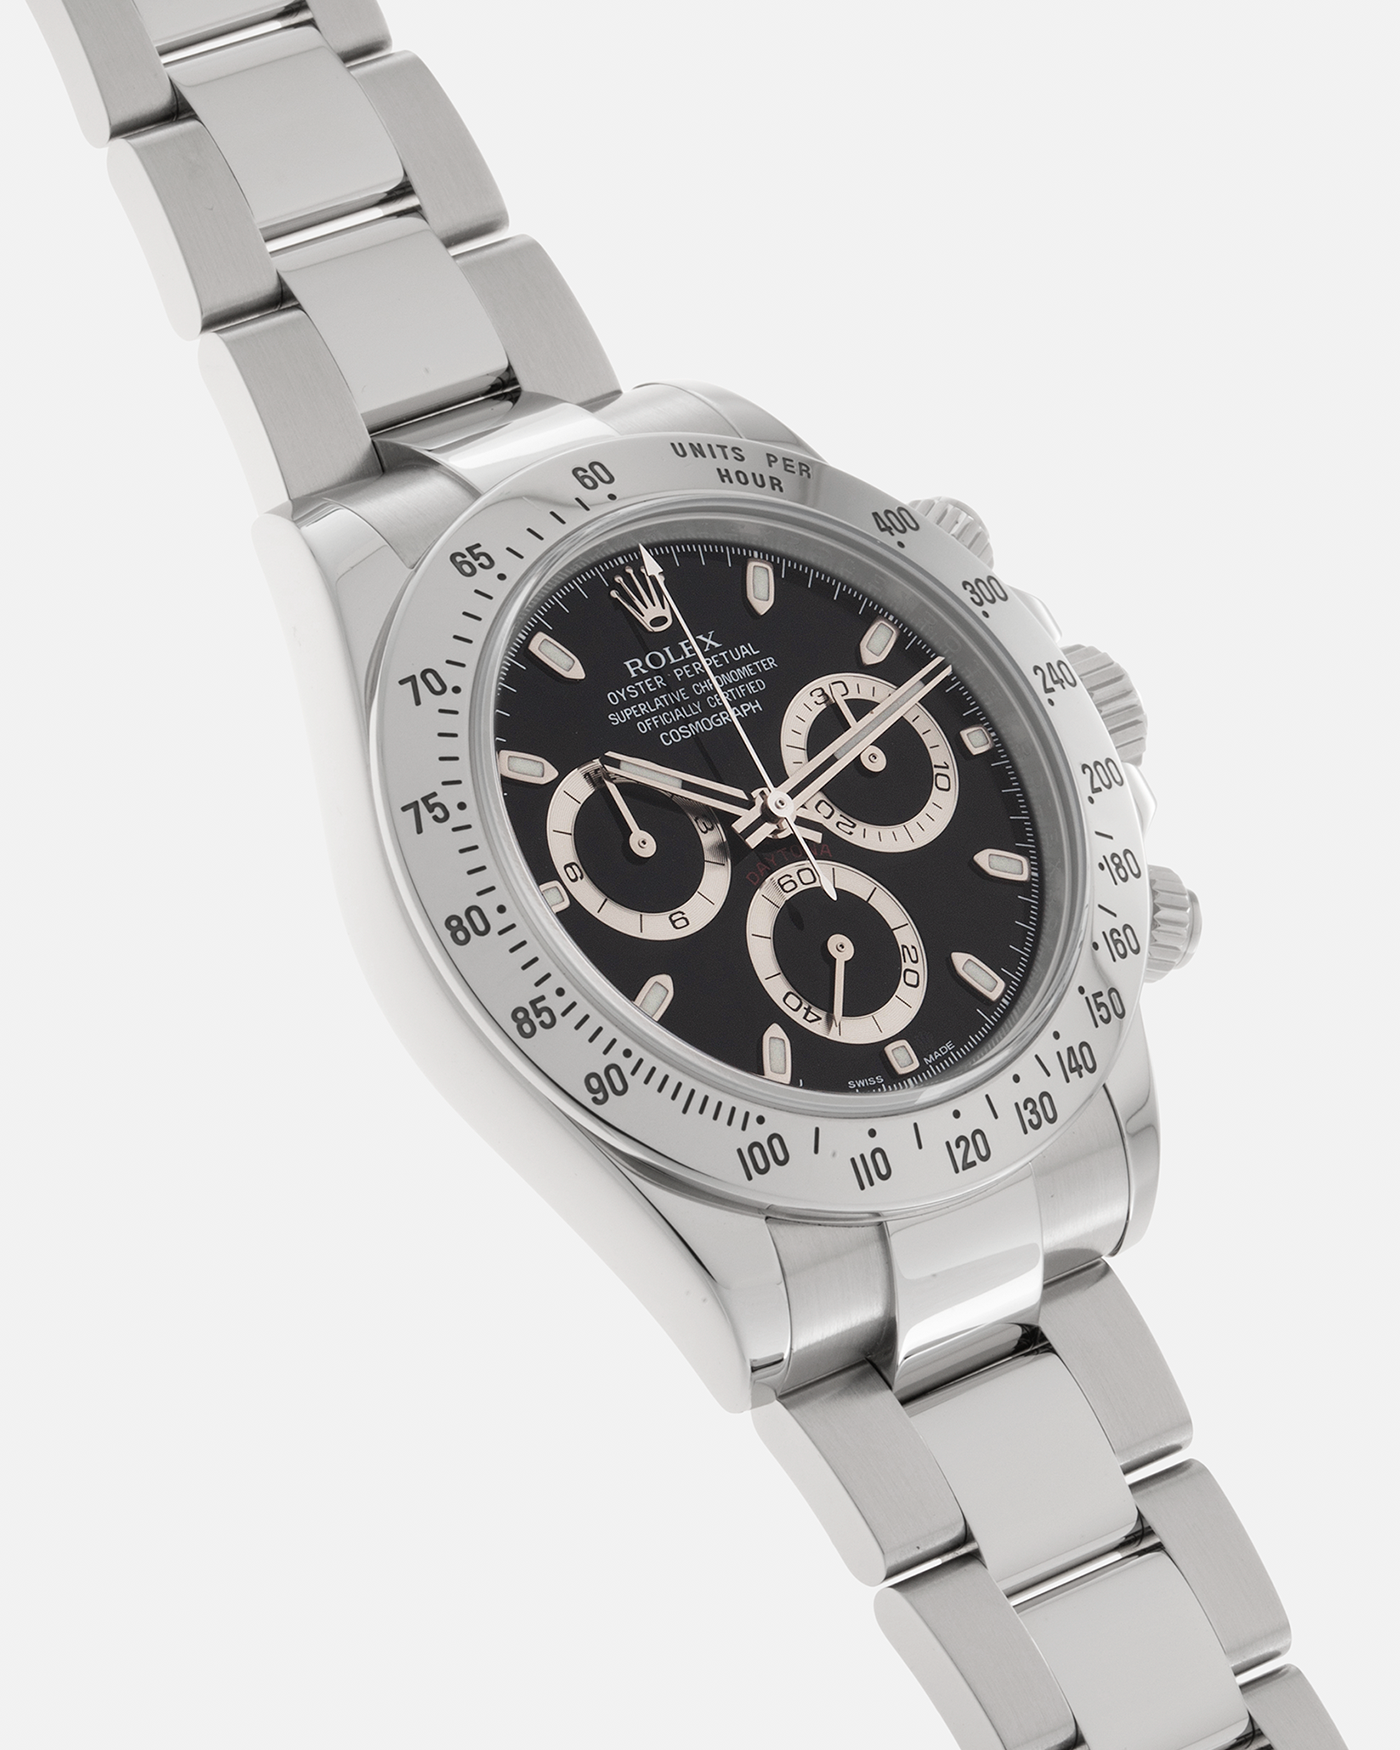 Brand: Rolex Year: 2010s Model: Cosmograph Daytona Reference: 116520 Material: Stainless Steel Movement: Rolex Cal. 4130, Self-Winding Case Diameter: 40mm Lug Width: 20mm Strap: Rolex Stainless Steel Oyster Bracelet with Signed Deployant Clasp